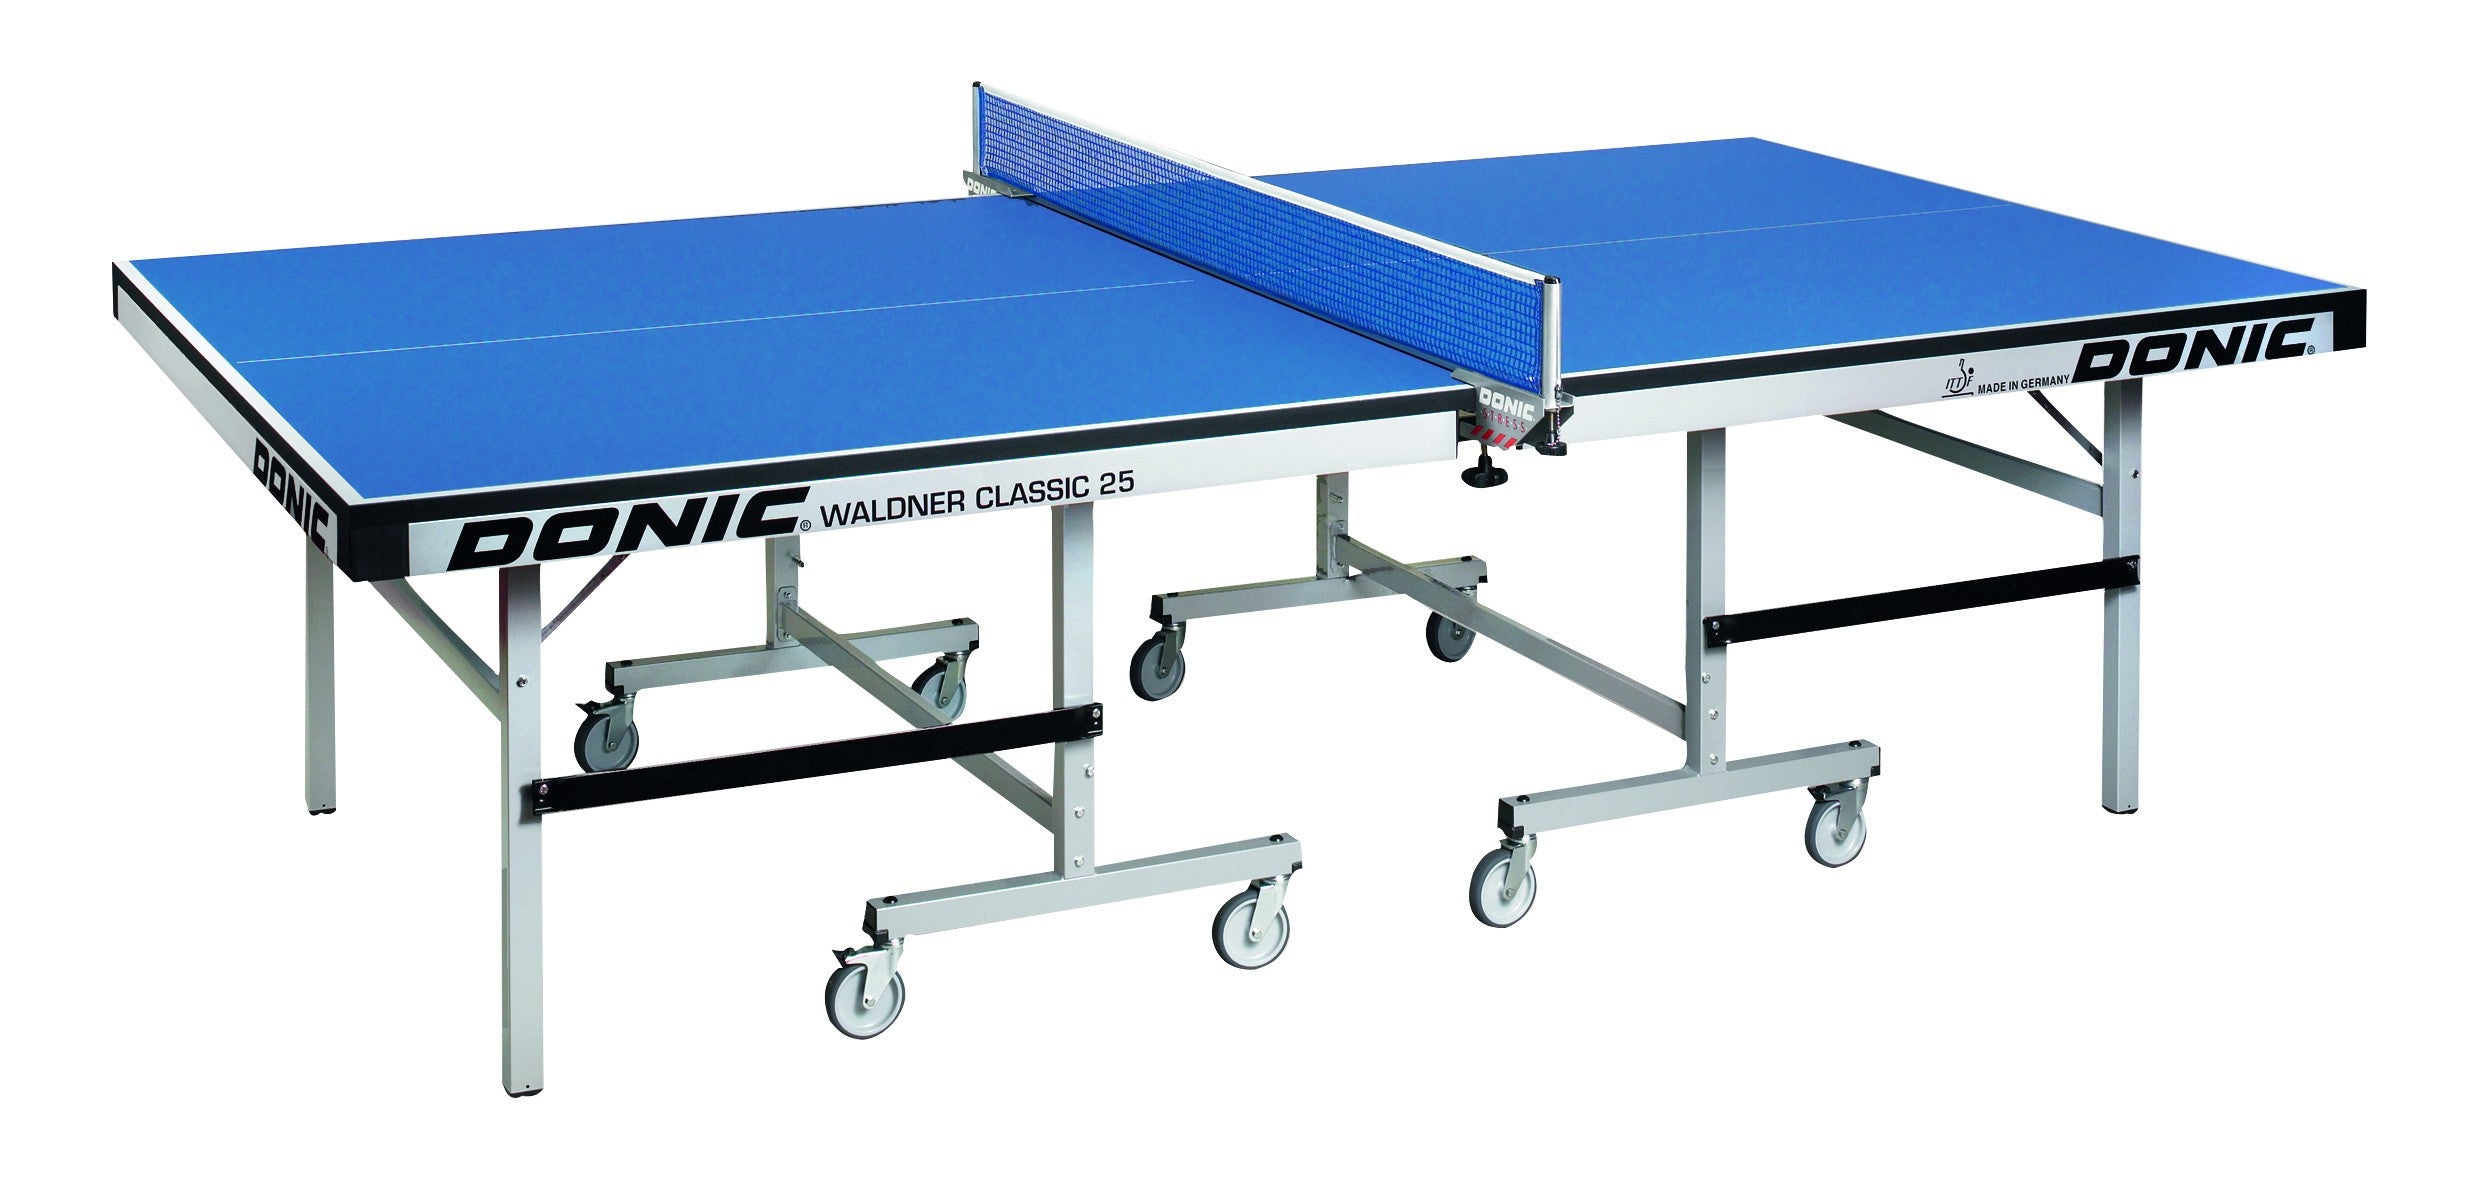 Soon National census Emptiness Donic Waldner Classic 25 ITTF-Approved Table Tennis Table – eTableTennis